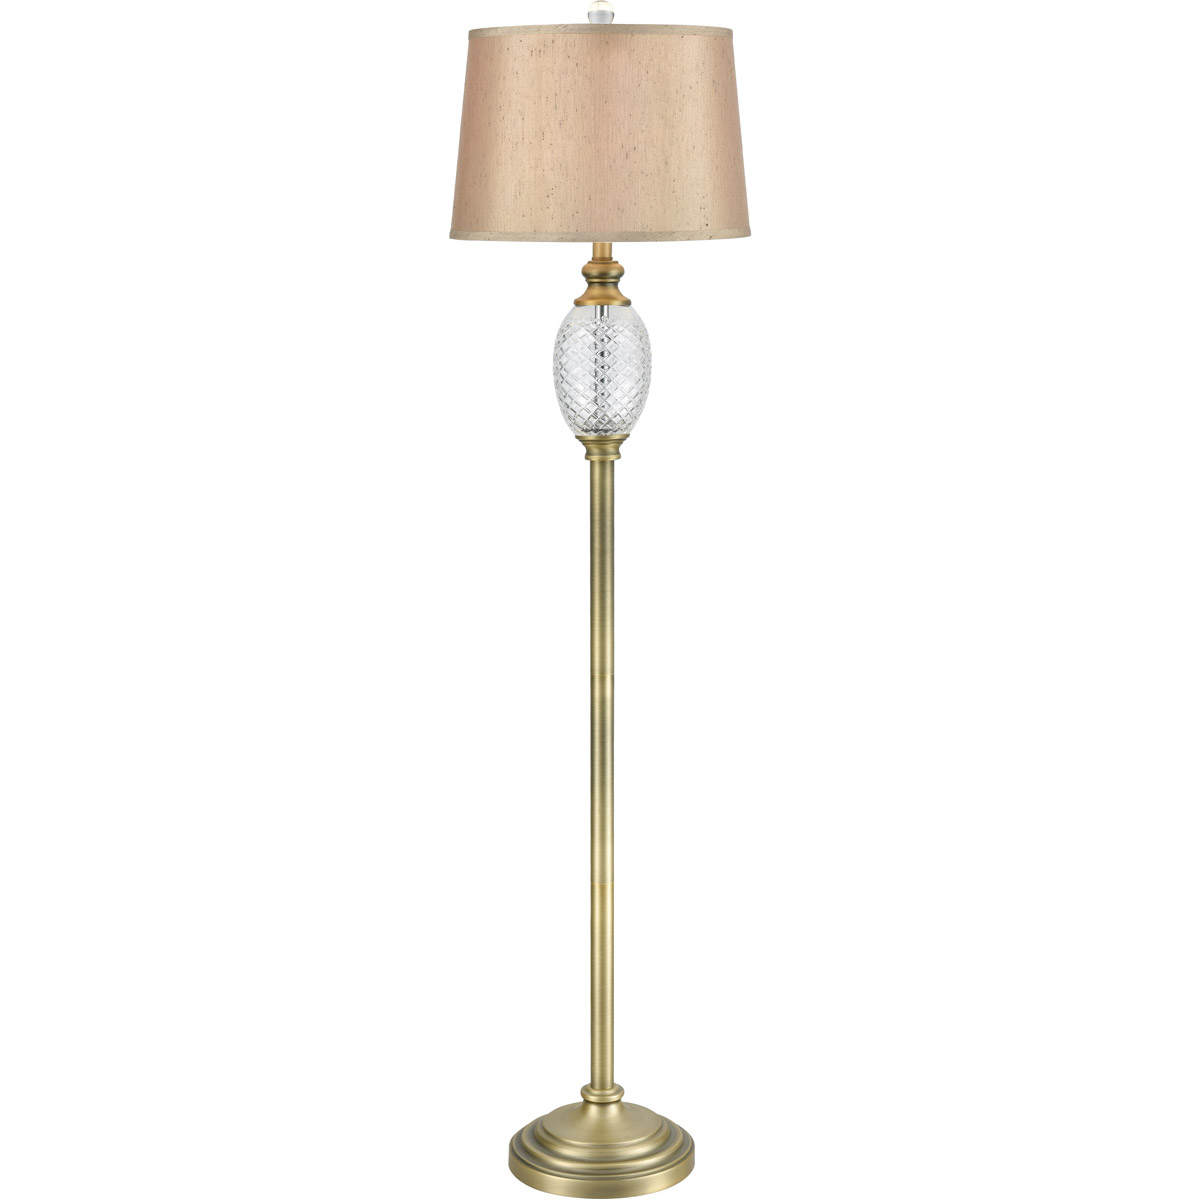 Details About Dale Tiffany Sgf17179 Brass Pineapple Floor Lamp Antique Nickel throughout size 1200 X 1200